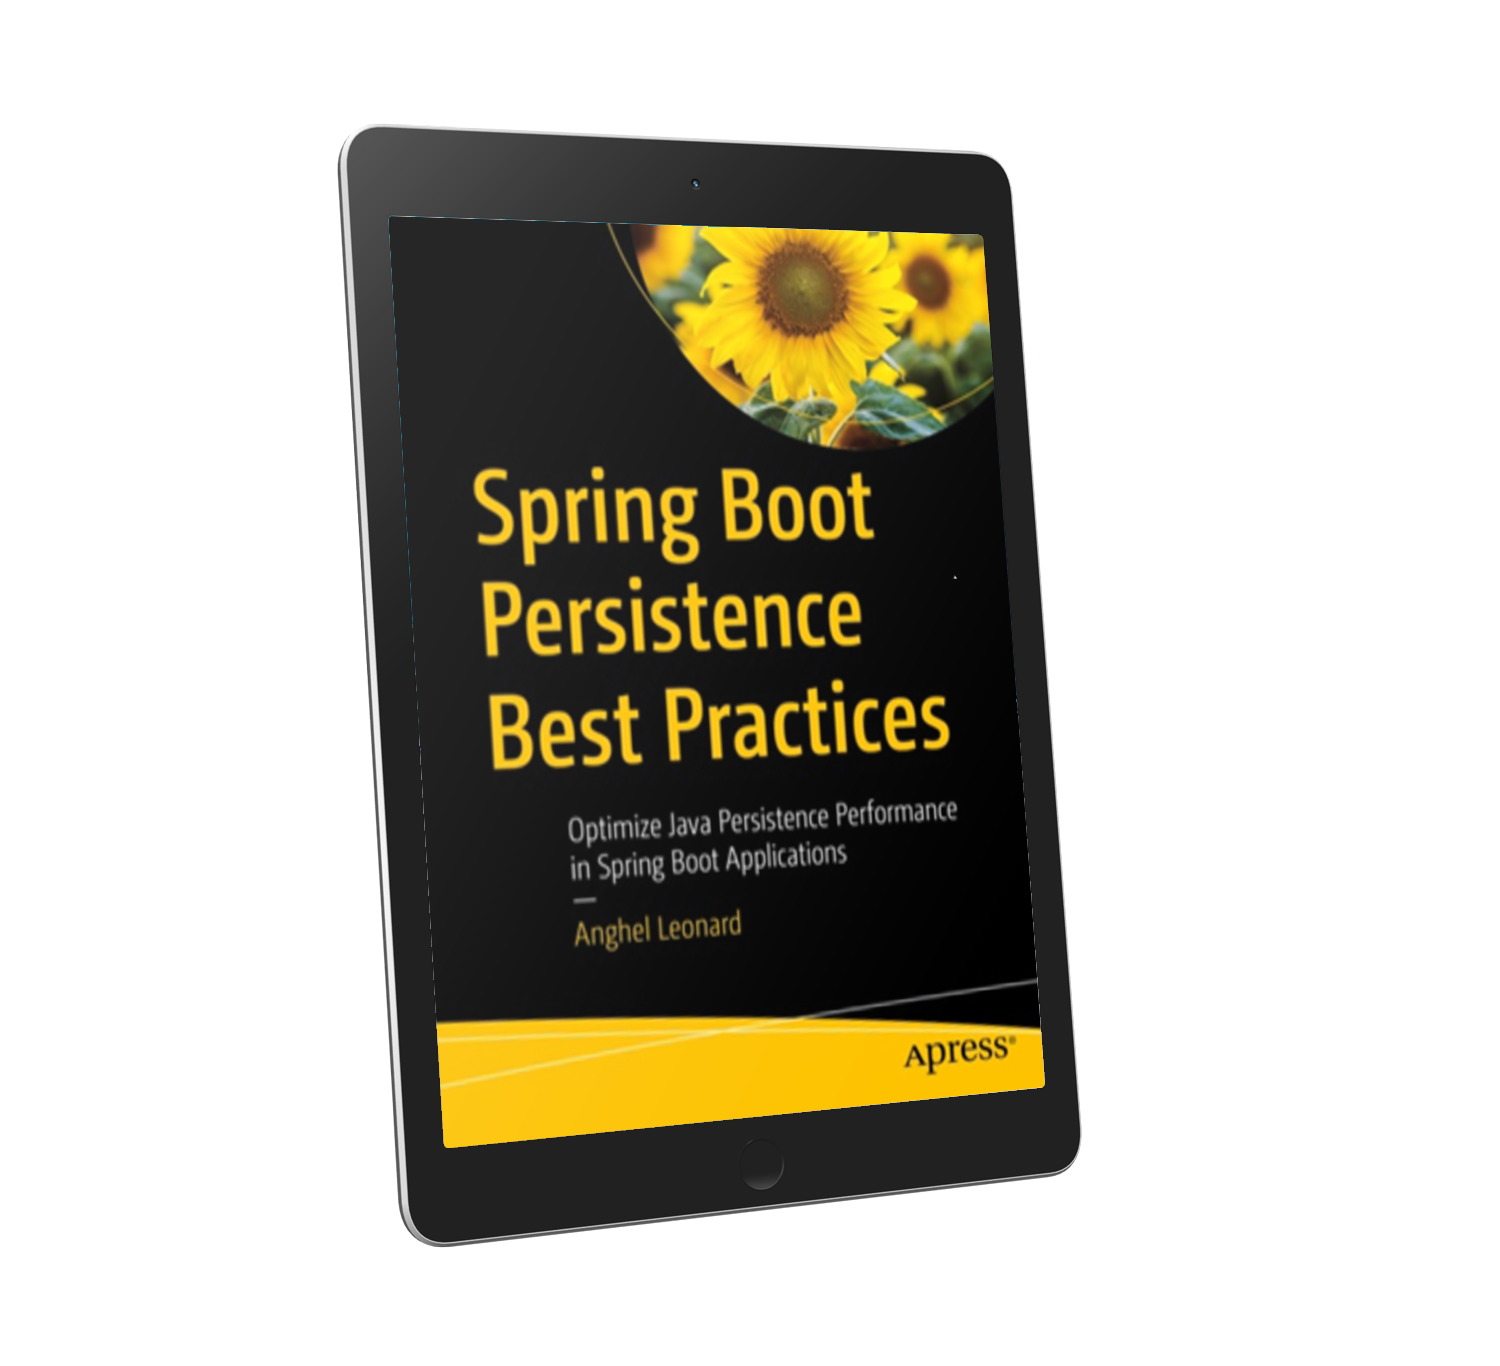 Spring Boot Persistence best practices